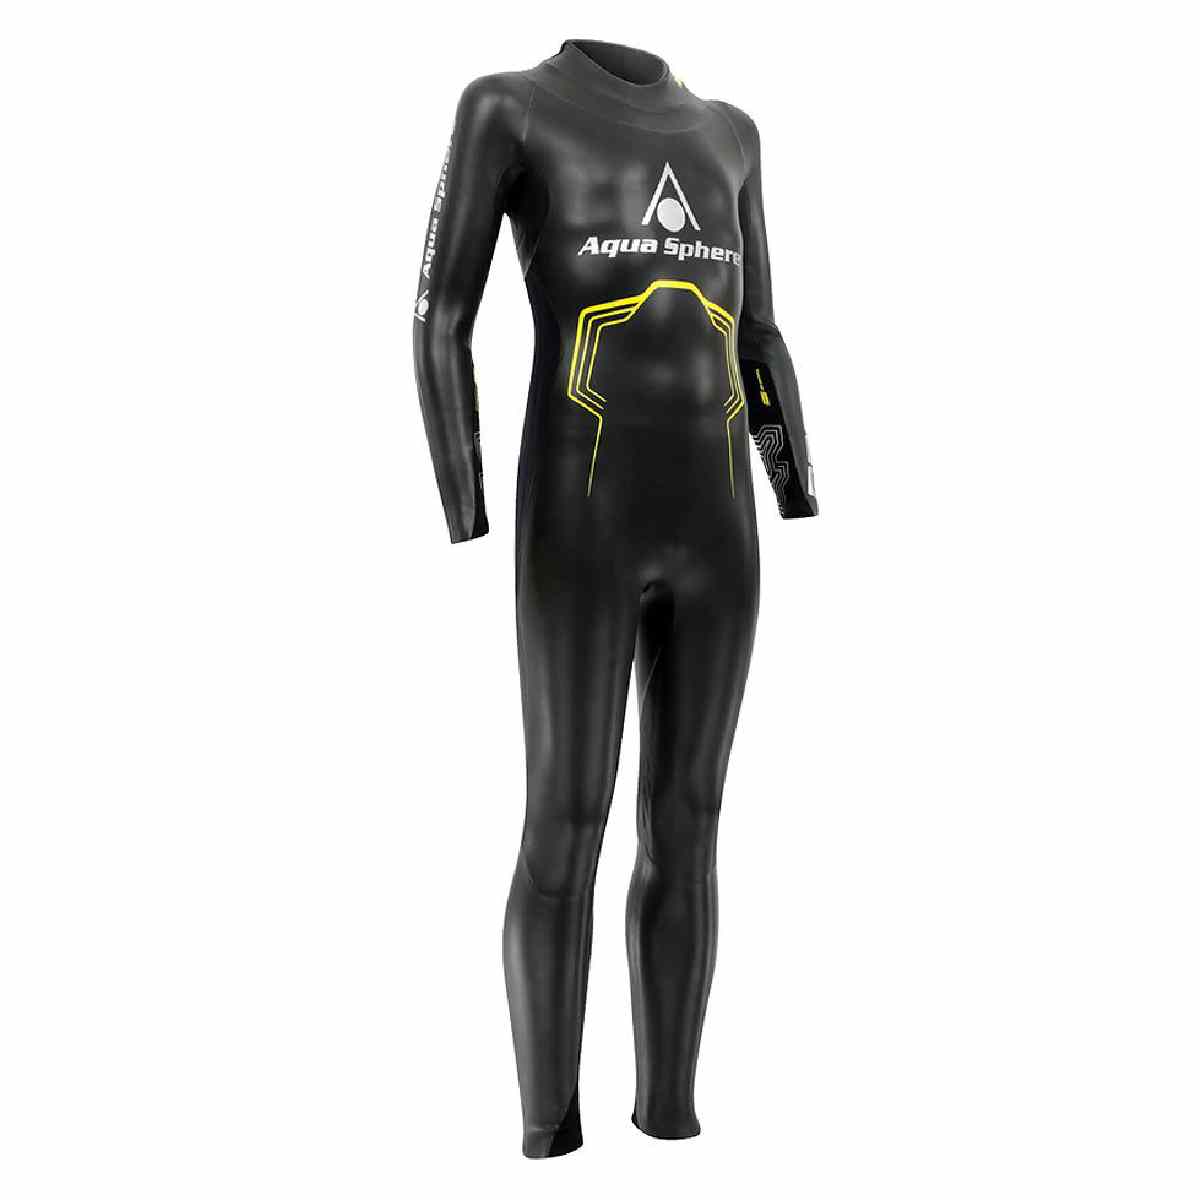 COMBINAISON ISOTHERMIQUE (WETSUIT) AQUA SPHERE RAGE YOUTH COMPETITOR